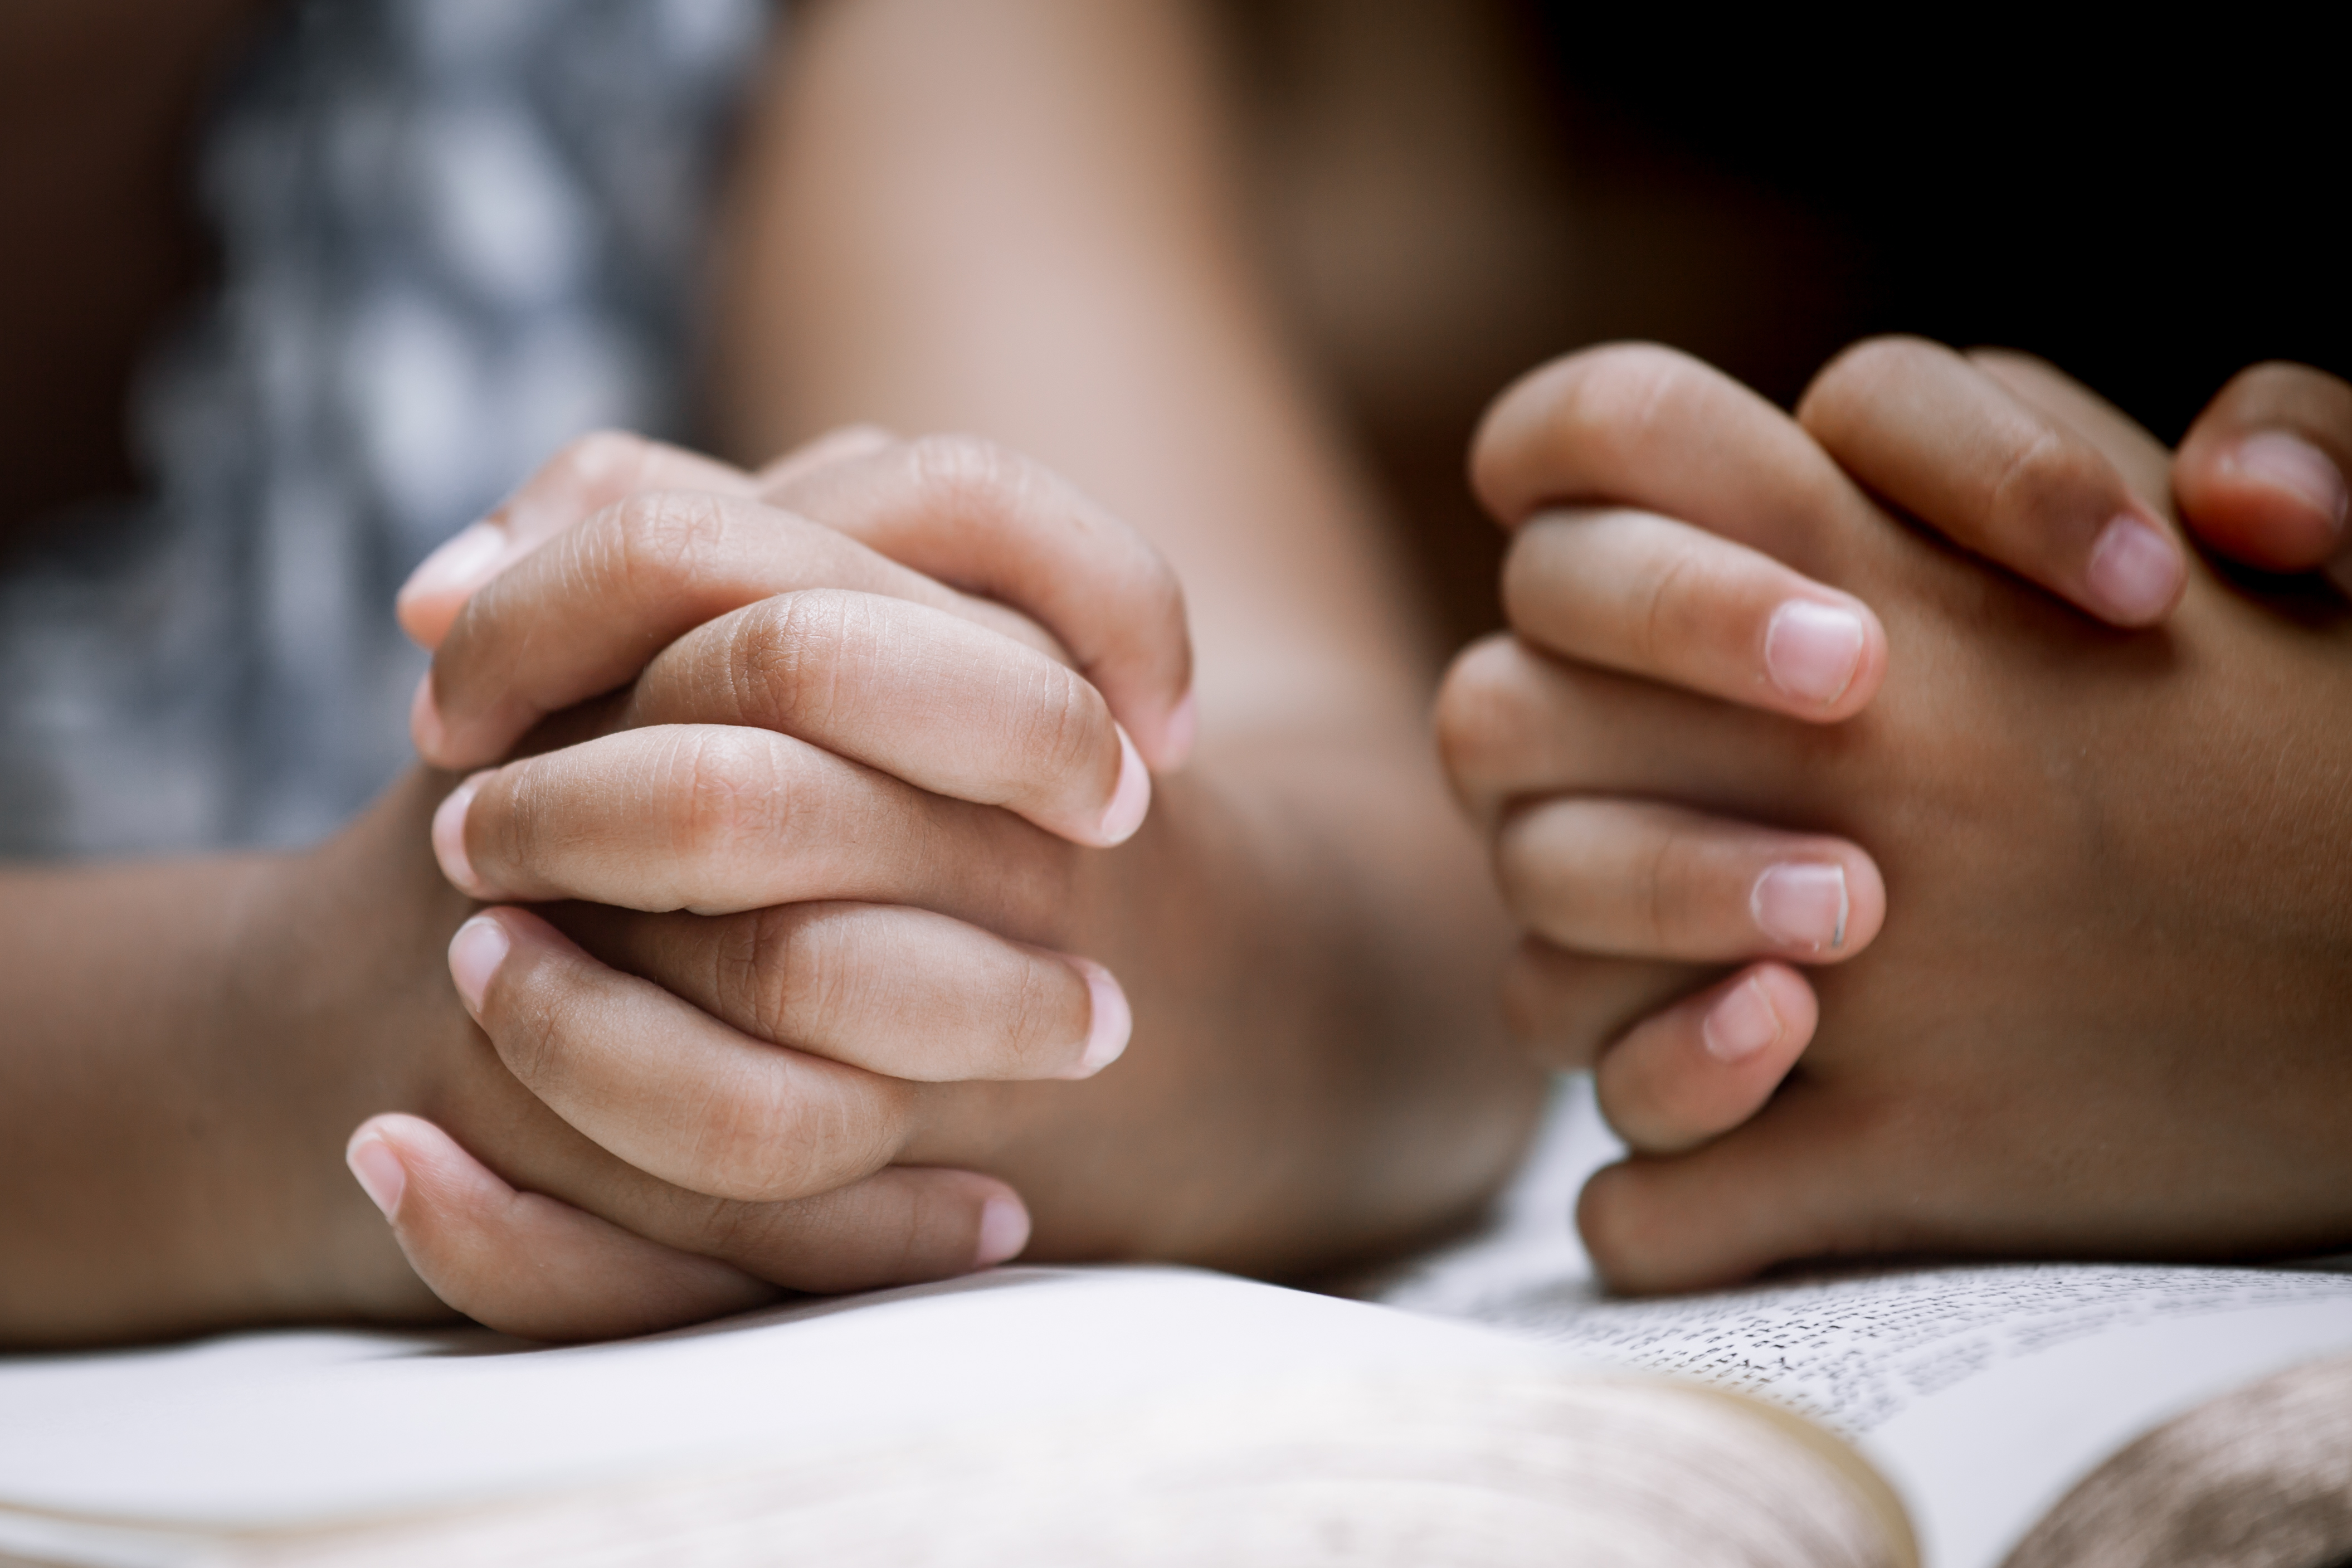 Two children’s hands clasped in prayer over a book